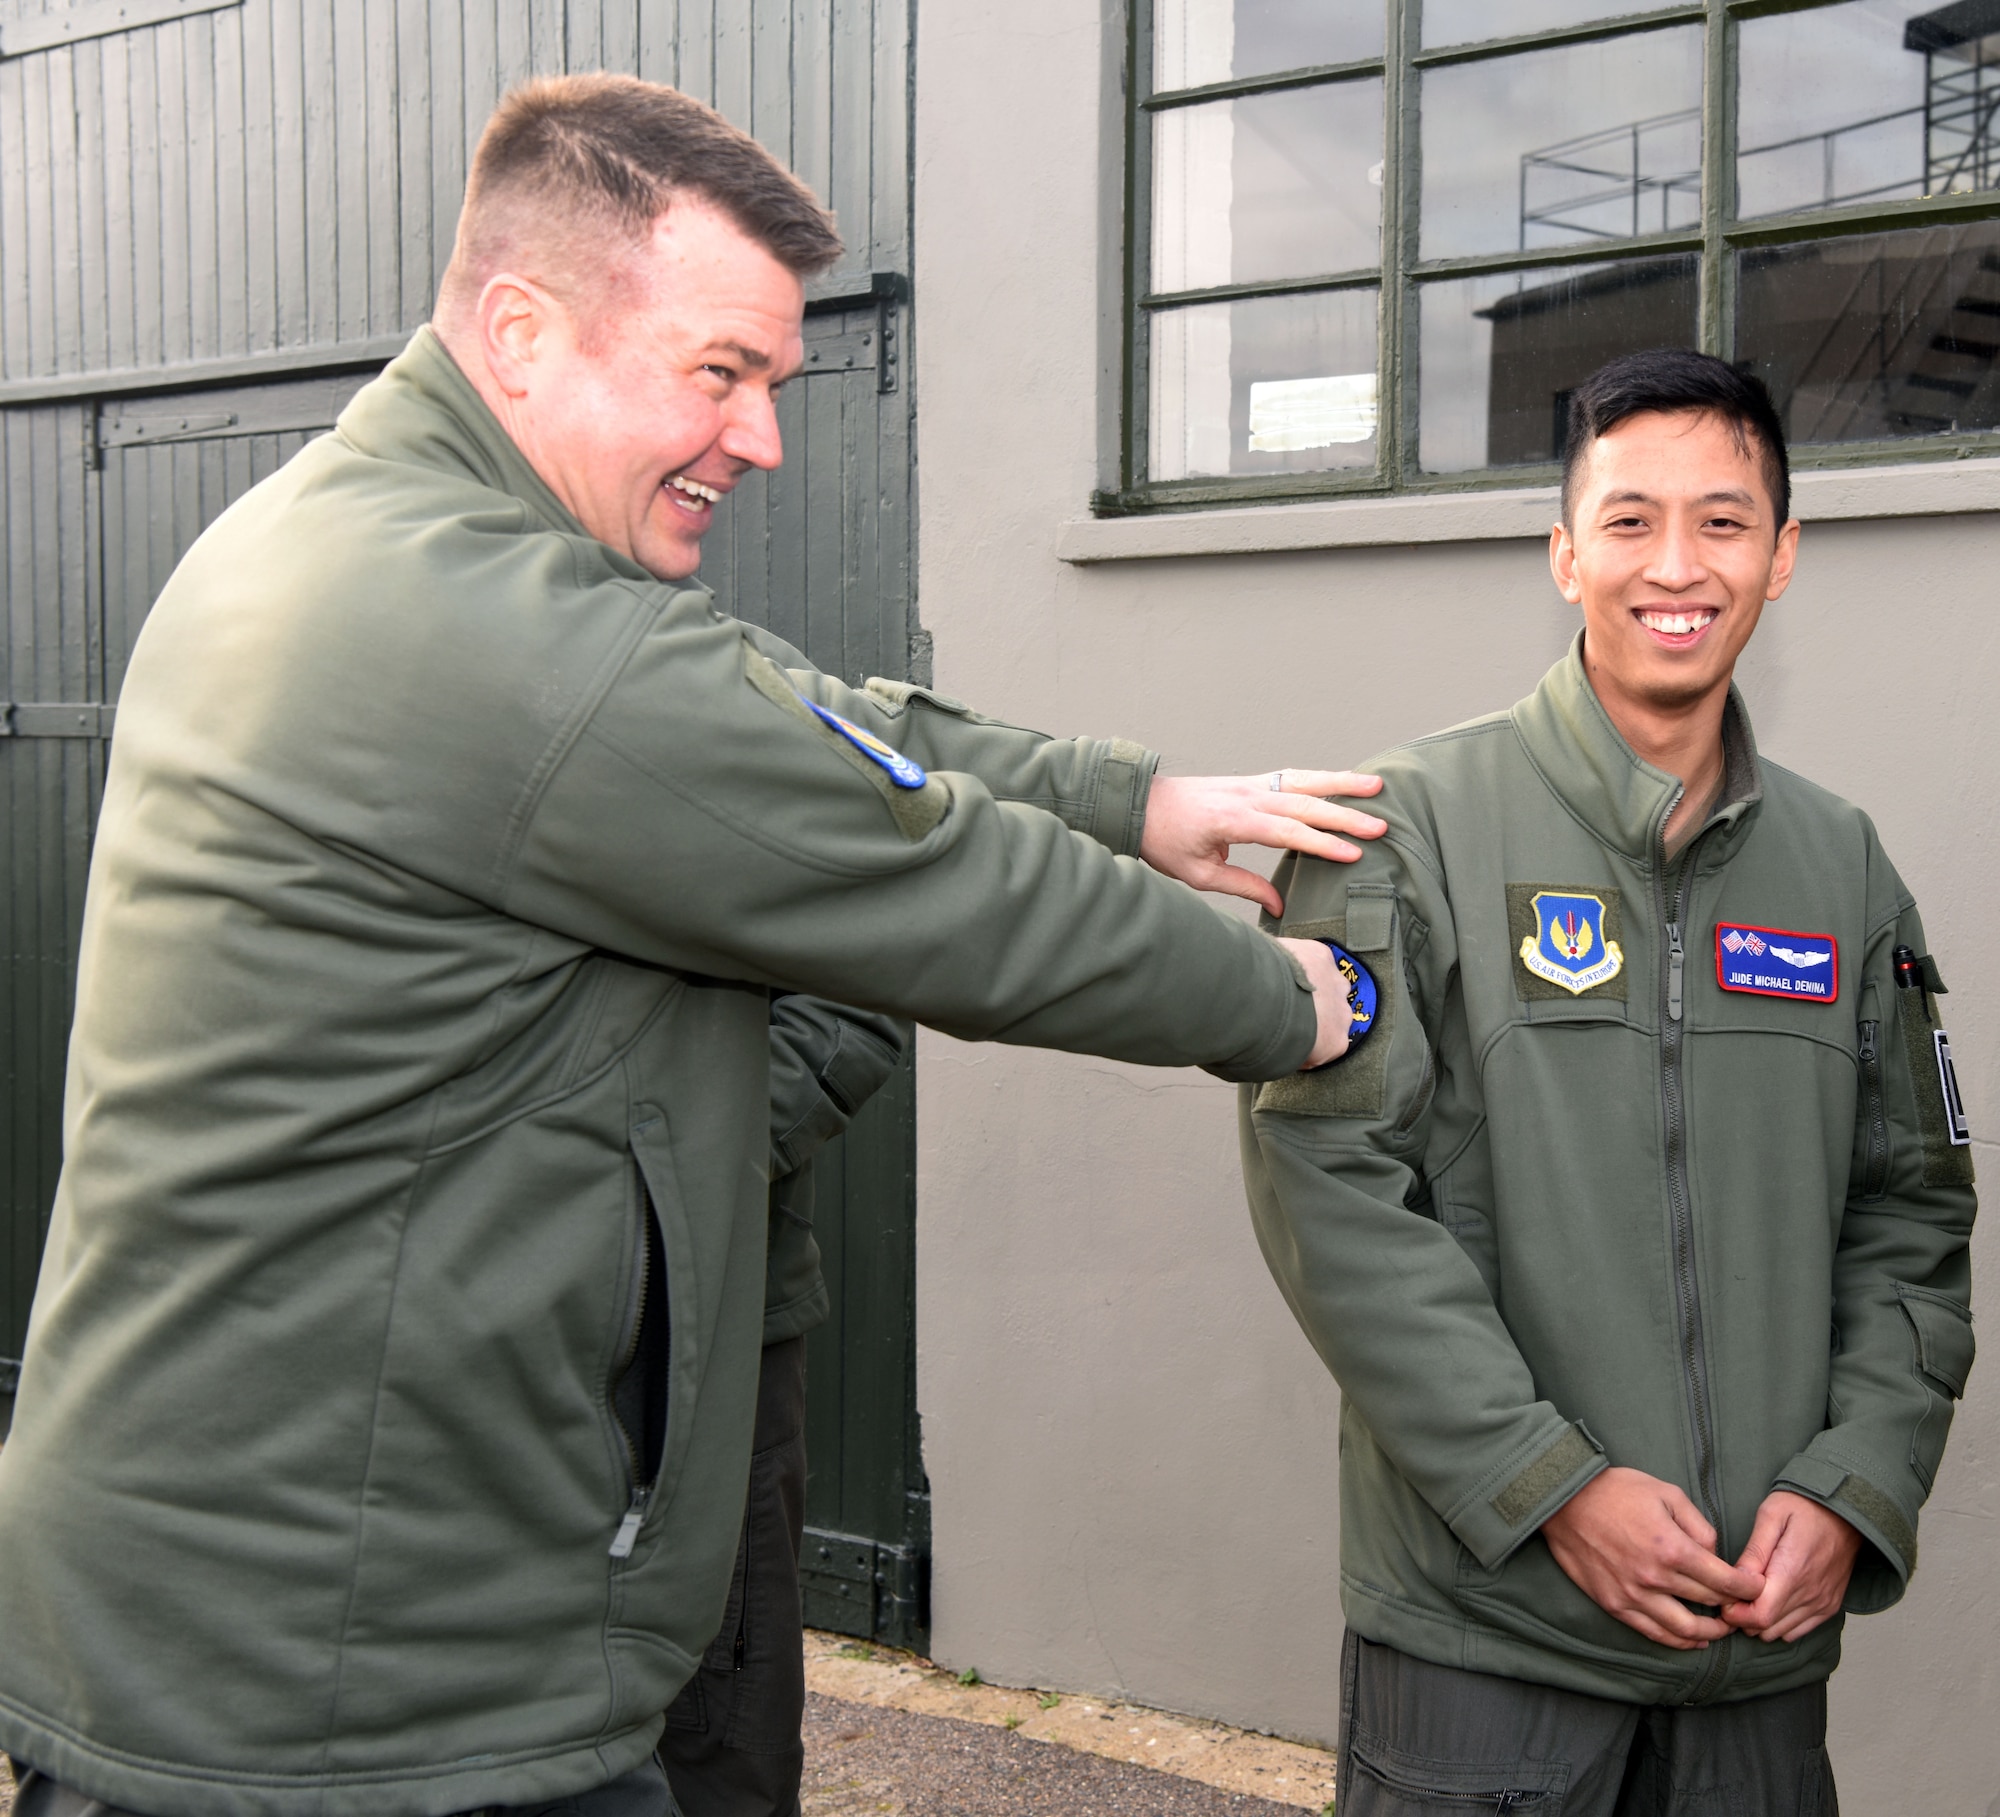 U.S. Air Force Lt. Col. Tyler Berge, left, 351st Air Refueling Squadron commander, presents the squadron heritage “Buzzard” patch to 1st Lt. Jude Michael Denina, 351st ARS co-pilot, at the 100th Bomb Group Memorial Museum, Thorpe Abbotts, England, Feb. 2, 2023. The heritage patch is presented to pilots and boom operators who have completed mission certification training. Thorpe Abbotts was home to the original 351st Bomb Squadron and 100th Bomb Group during World War II. (U.S. Air Force photo by Karen Abeyasekere)